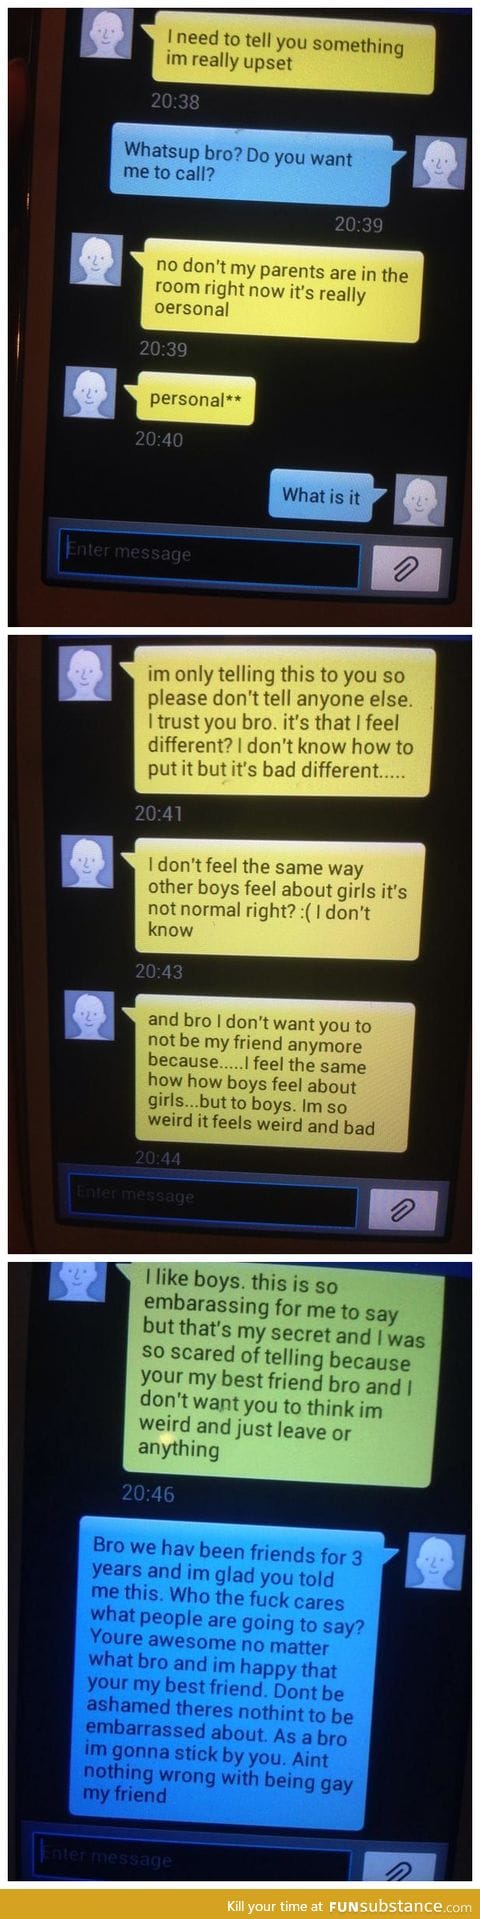 A heartwarming convo between a 13 year old and his best friend